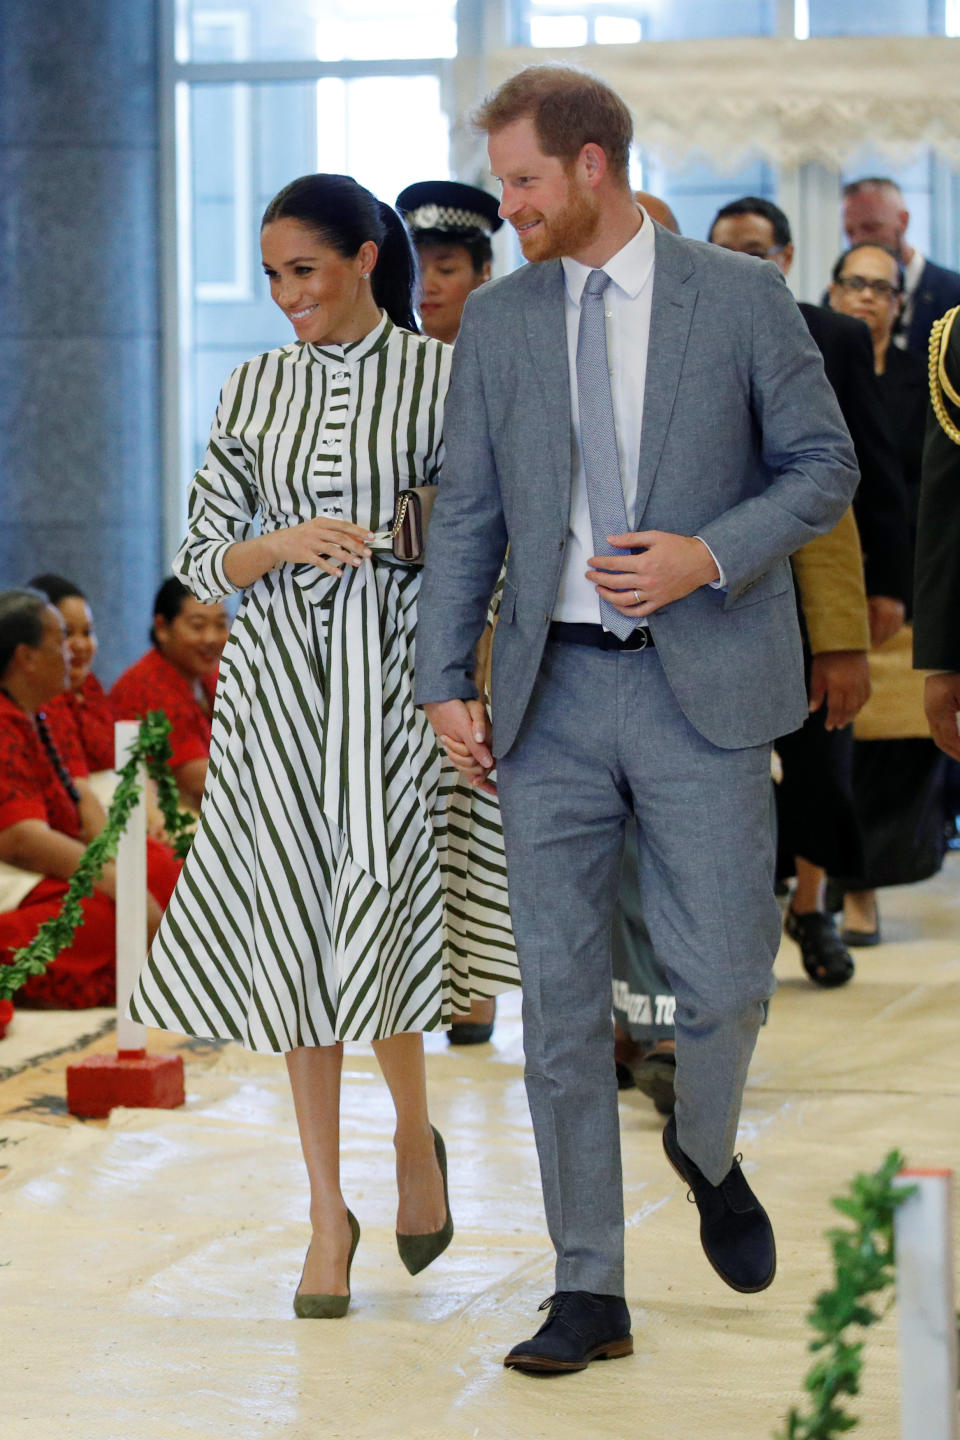 <p>For the couple’s second day in Tonga, the Duchess chose a striped midi dress by Martin Grant – a label she has looked to throughout the tour so far. She accessorised the daytime look with a Prada clutch, stud earrings from Birks and olive green shoes. <em>[Photo: Getty]</em> </p>